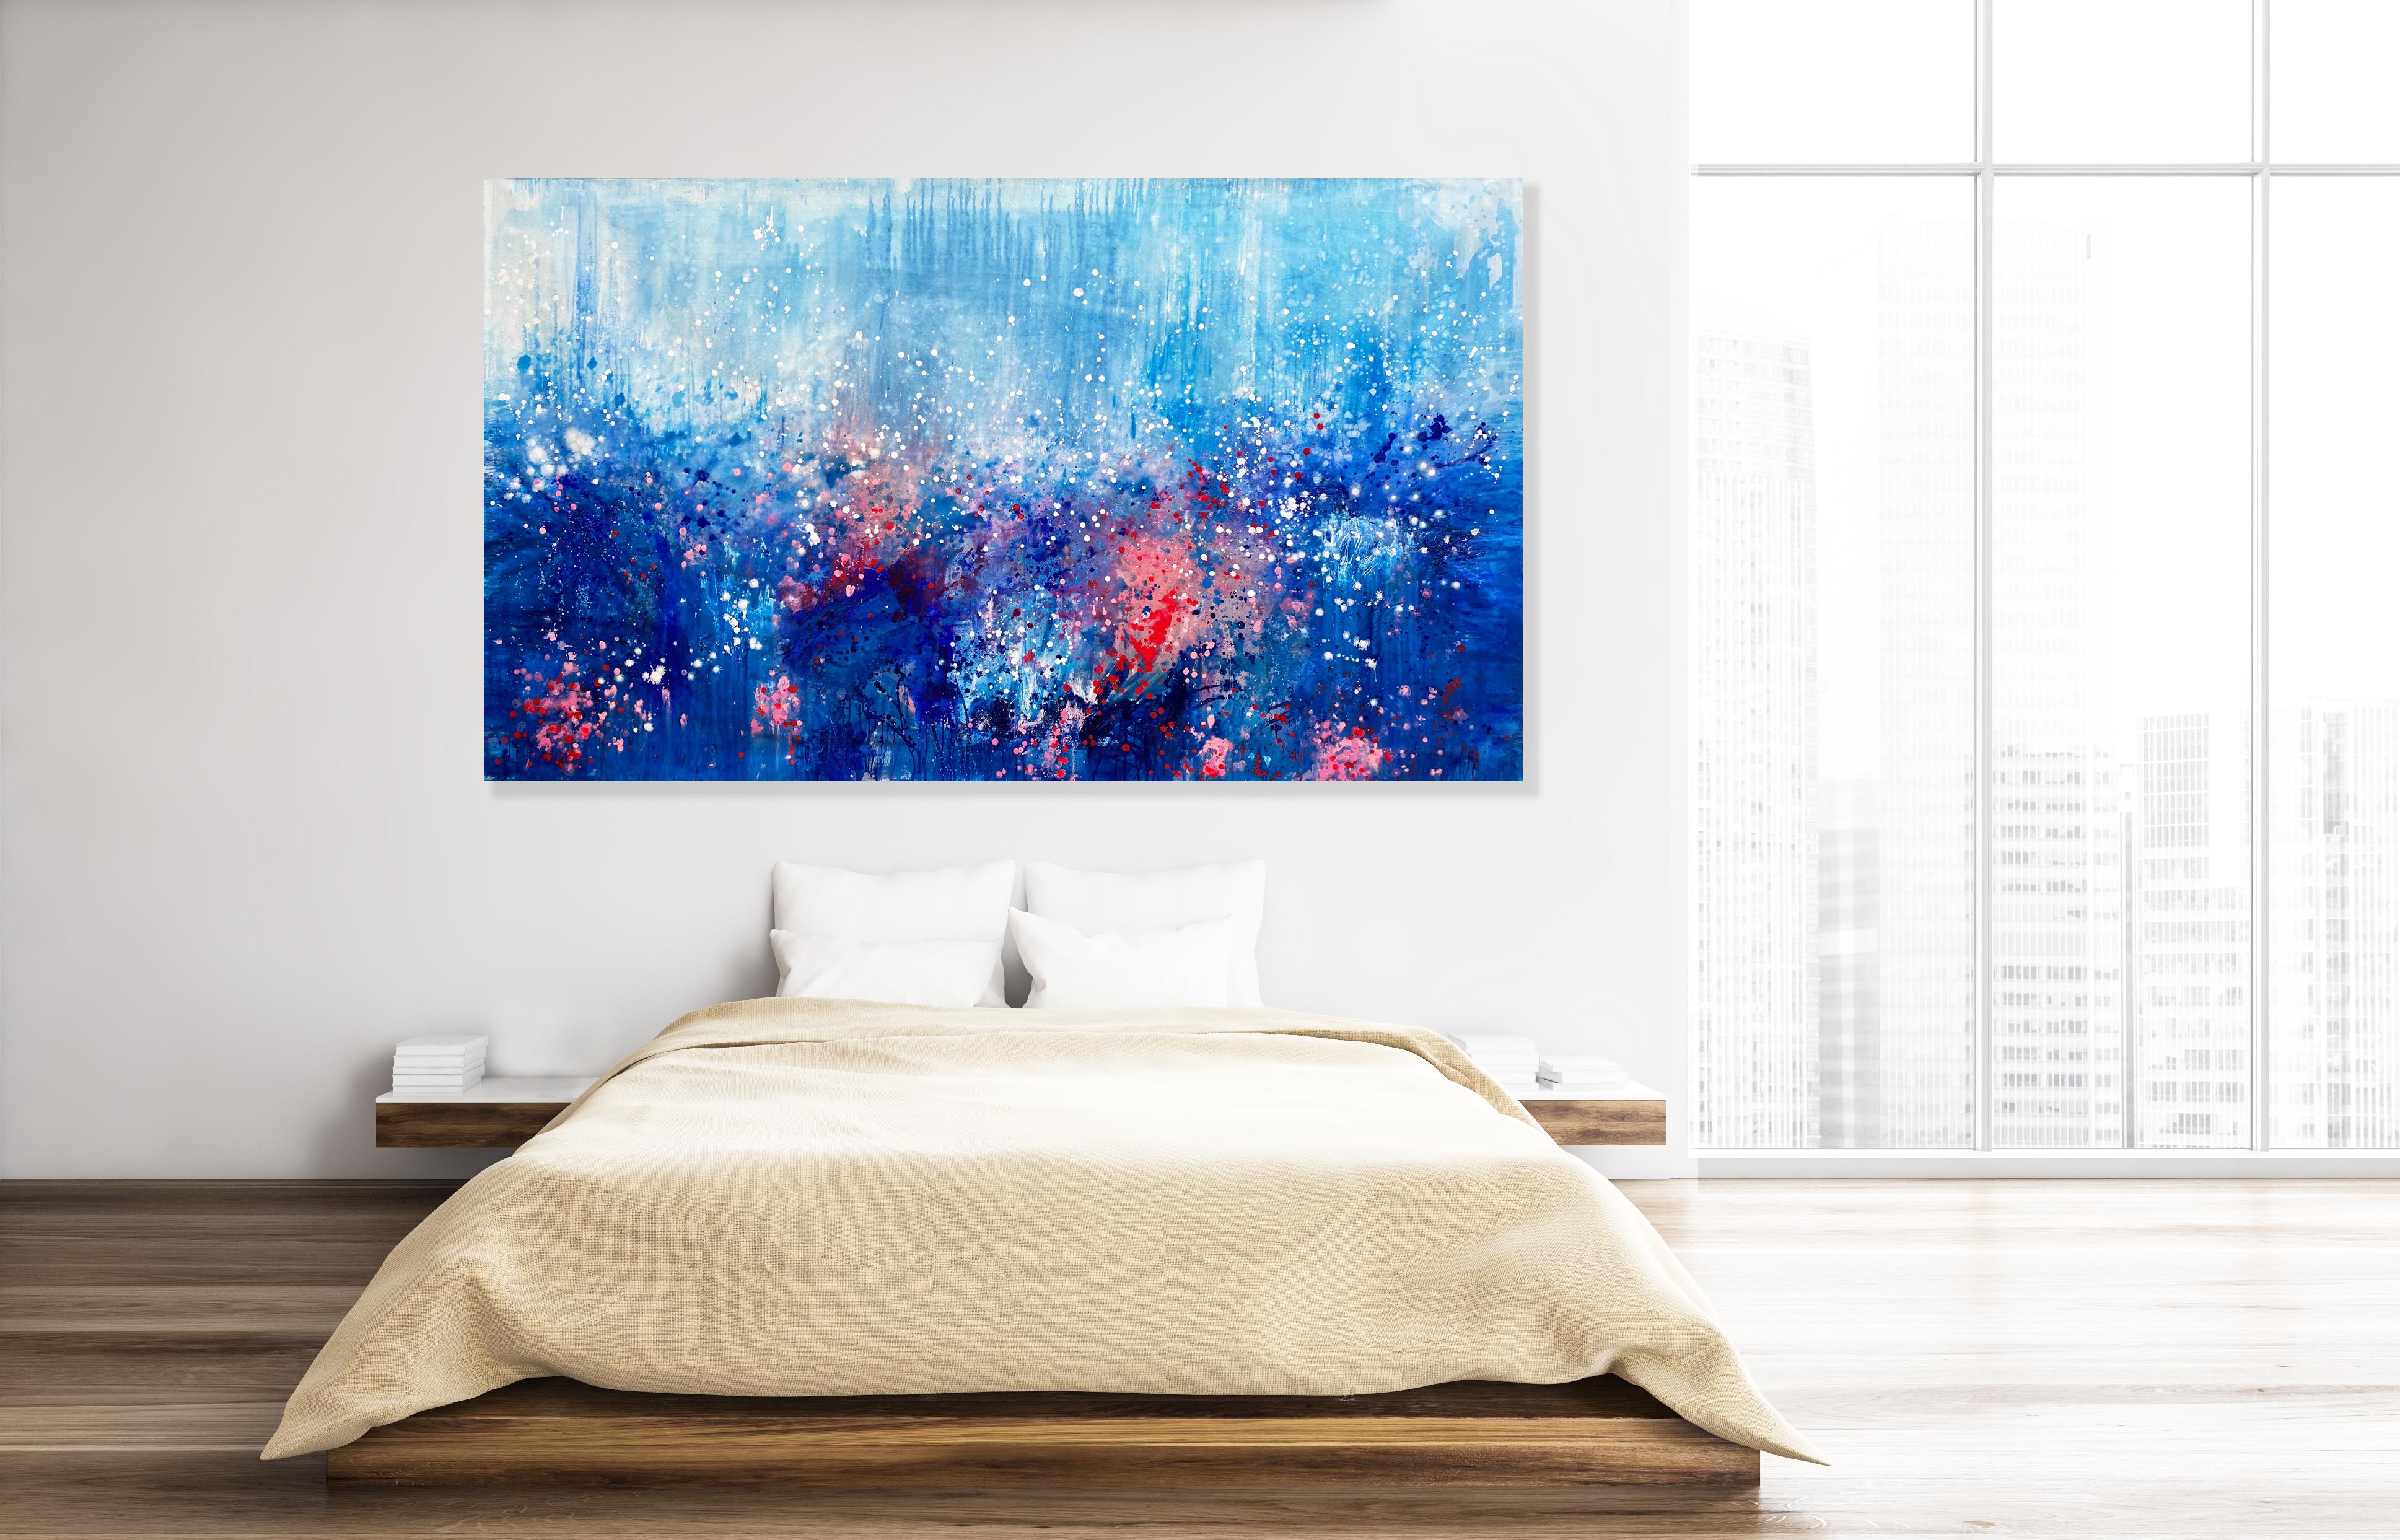 Falling Joy large statement art abstract painting blue pink red blue coral  - Painting by Kathleen Rhee